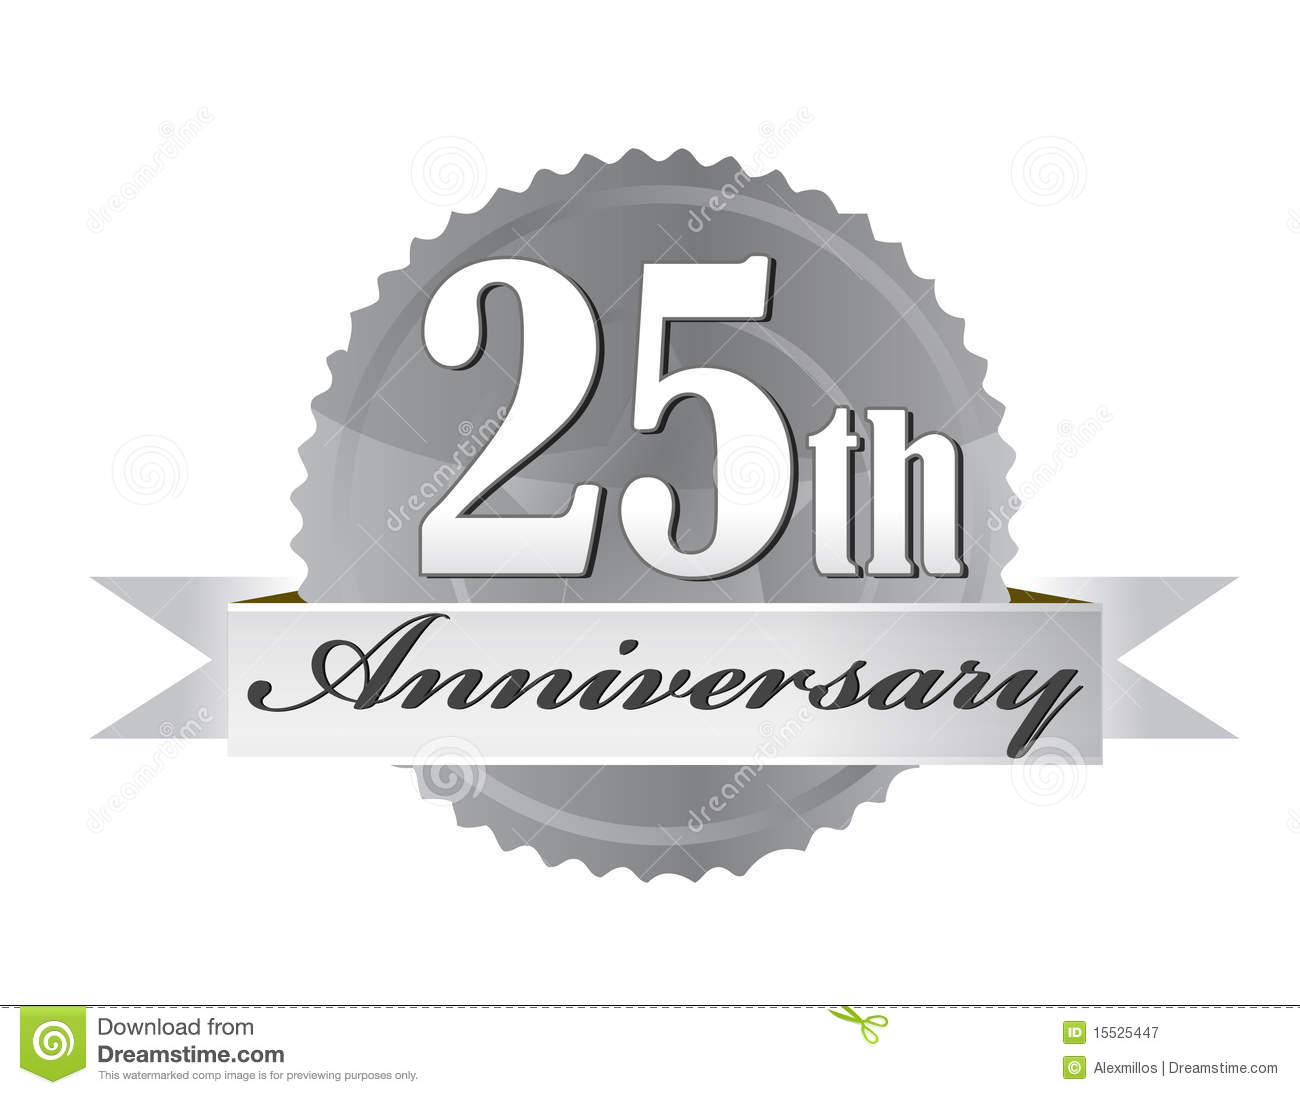 25th Anniversary Seal Royalty Free Stock Photography   Image  15525447